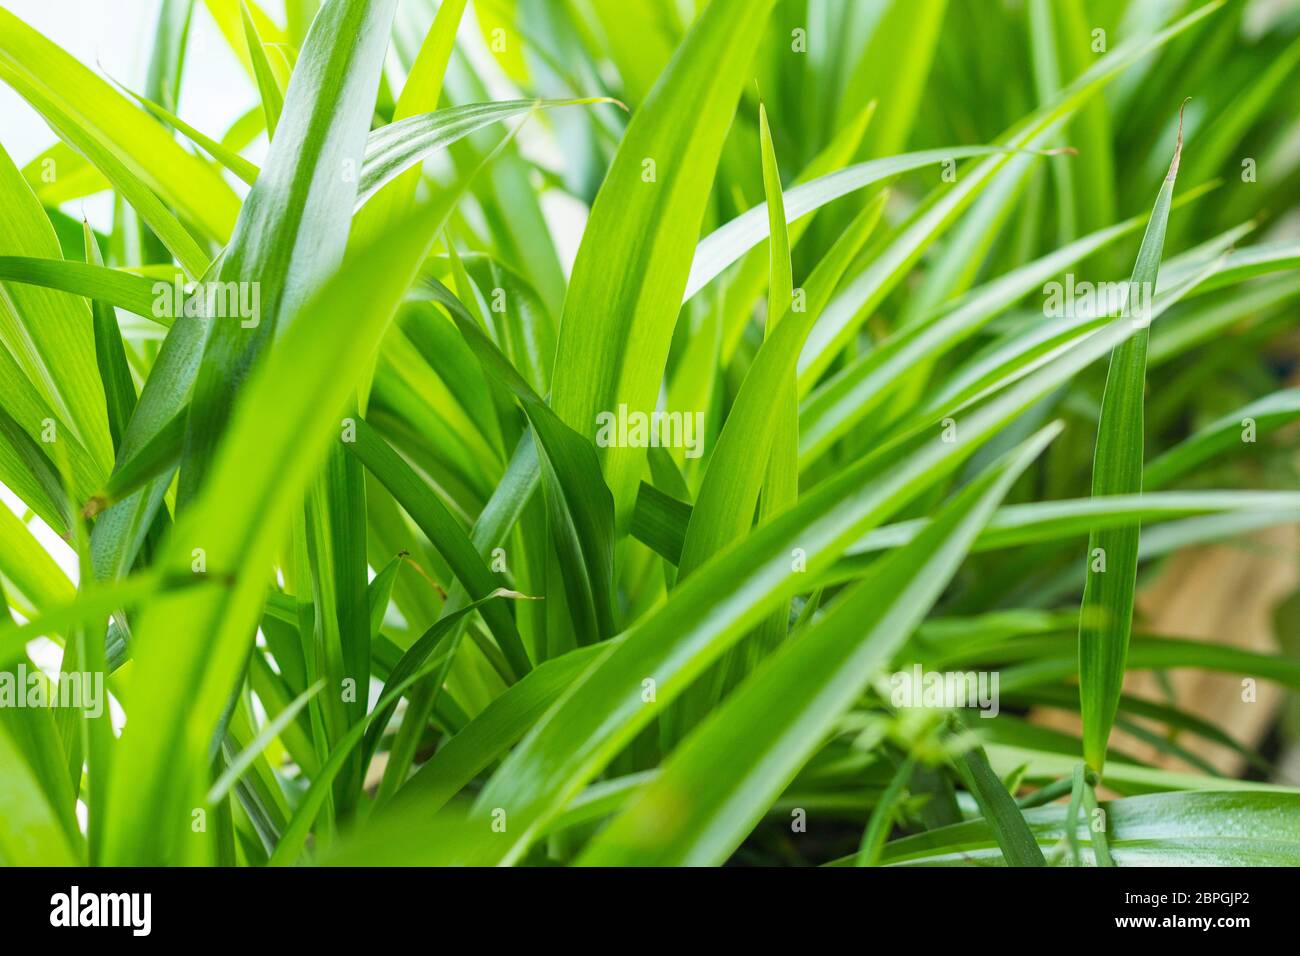 Green lily Chlorophytum comosum Green spider plant in close-up growth decoration plant robust houseplant Stock Photo